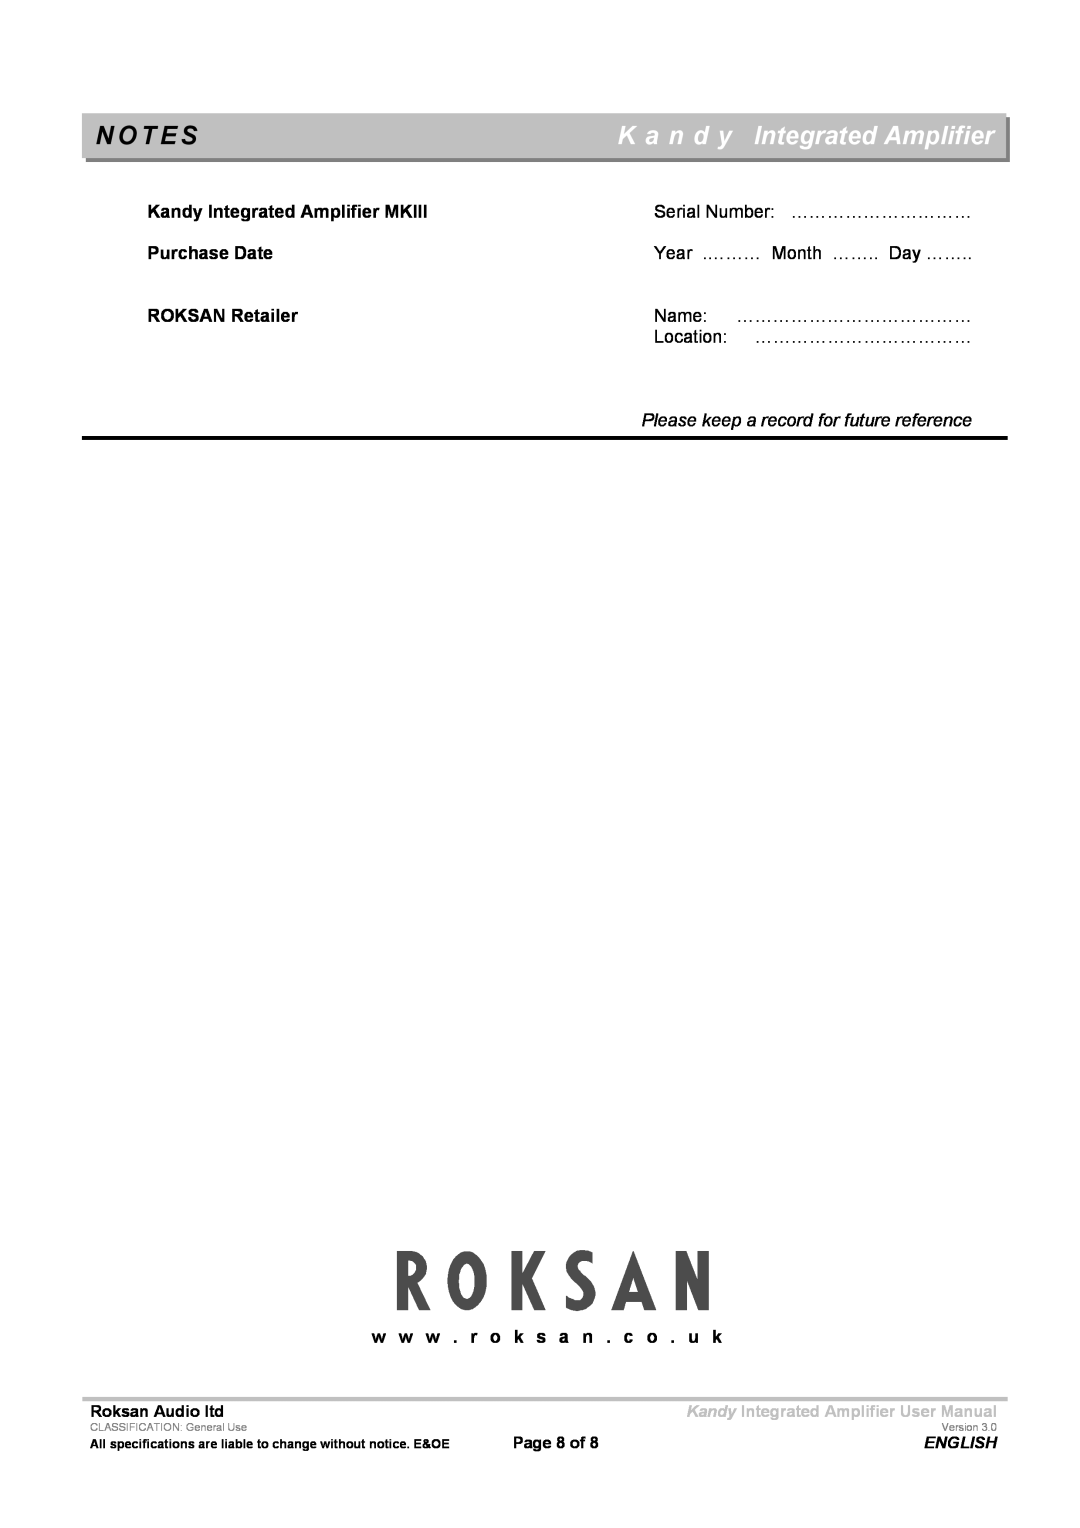 Roksan Audio MK III N O T E S, K a n d y Integrated Amplifier, Please keep a record for future reference, Page 8 of 